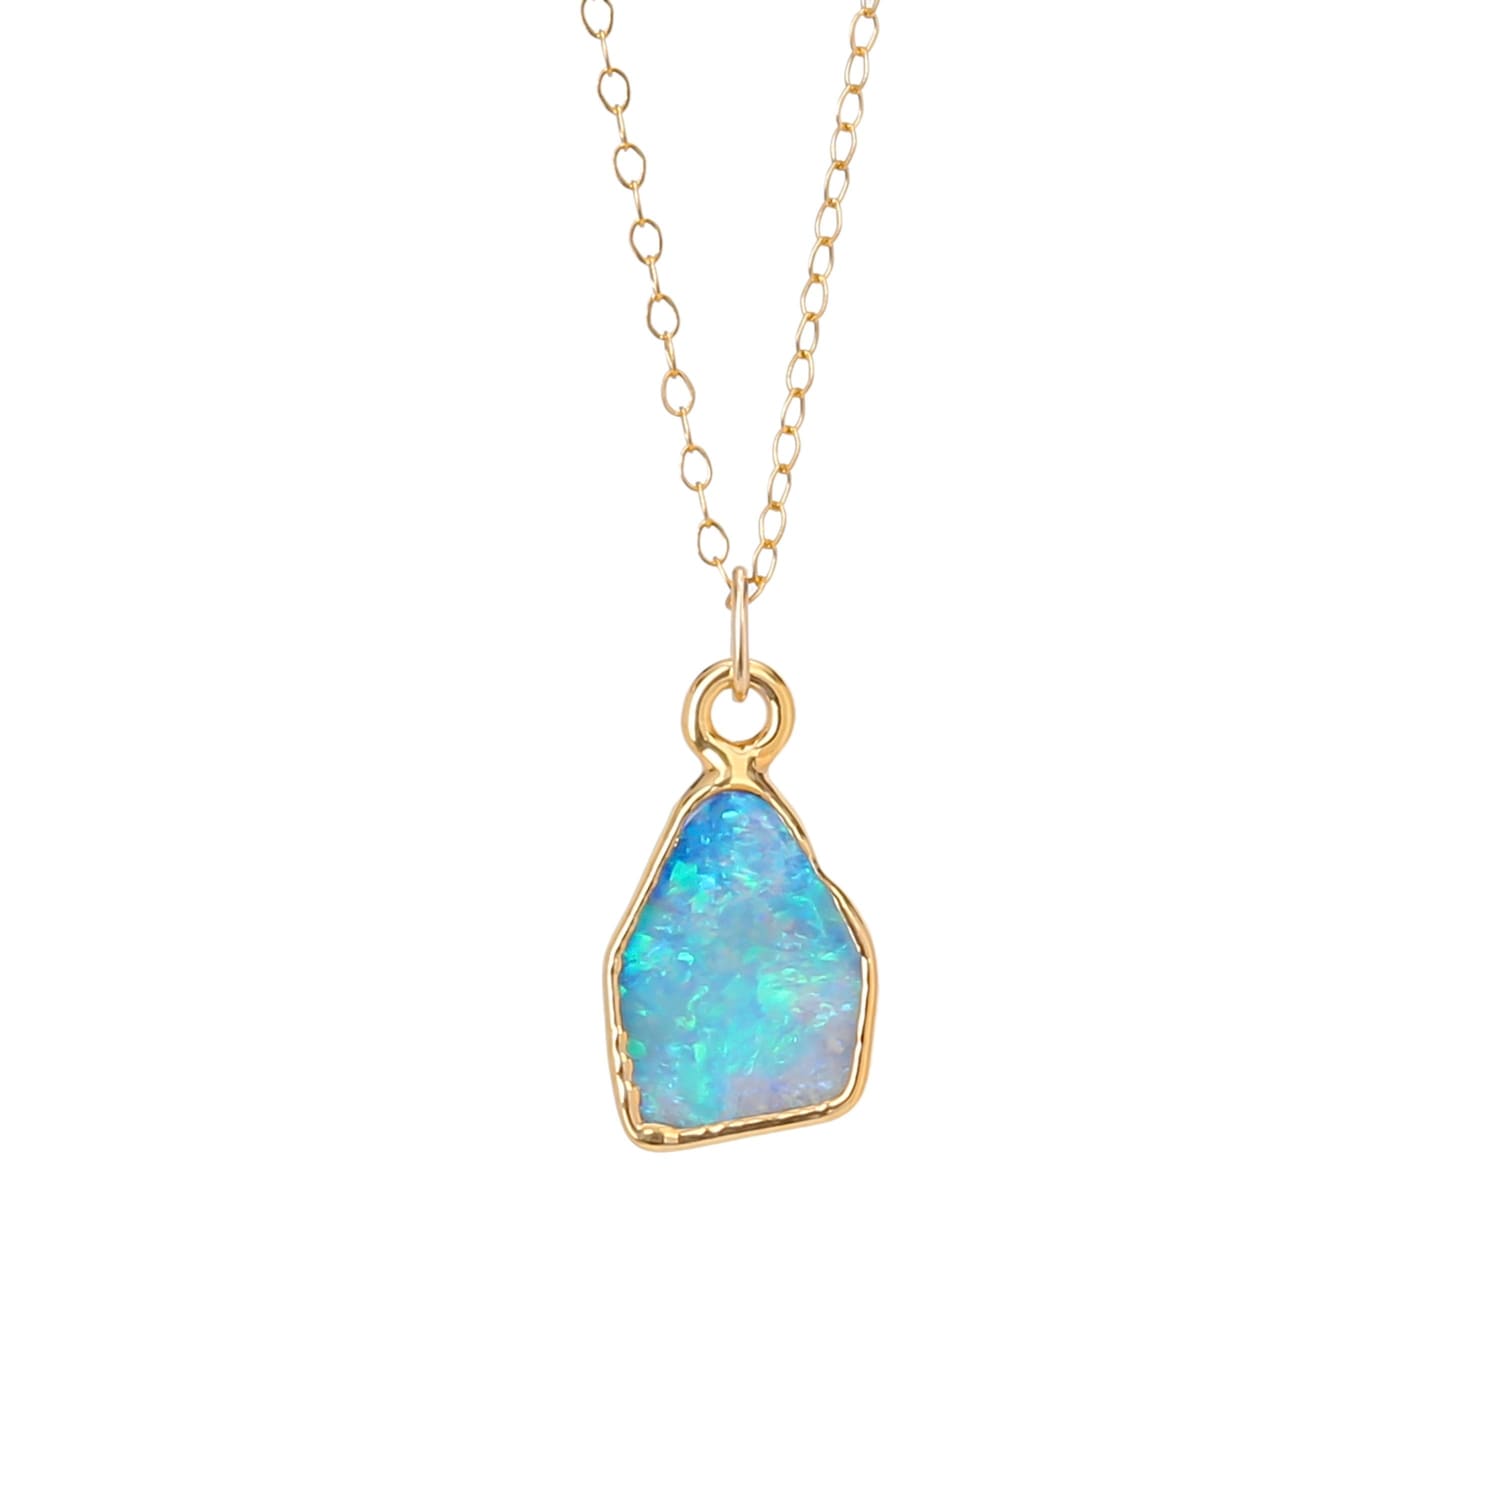 Raw Australian Opal Necklace with Paperclip Chain Gemstone